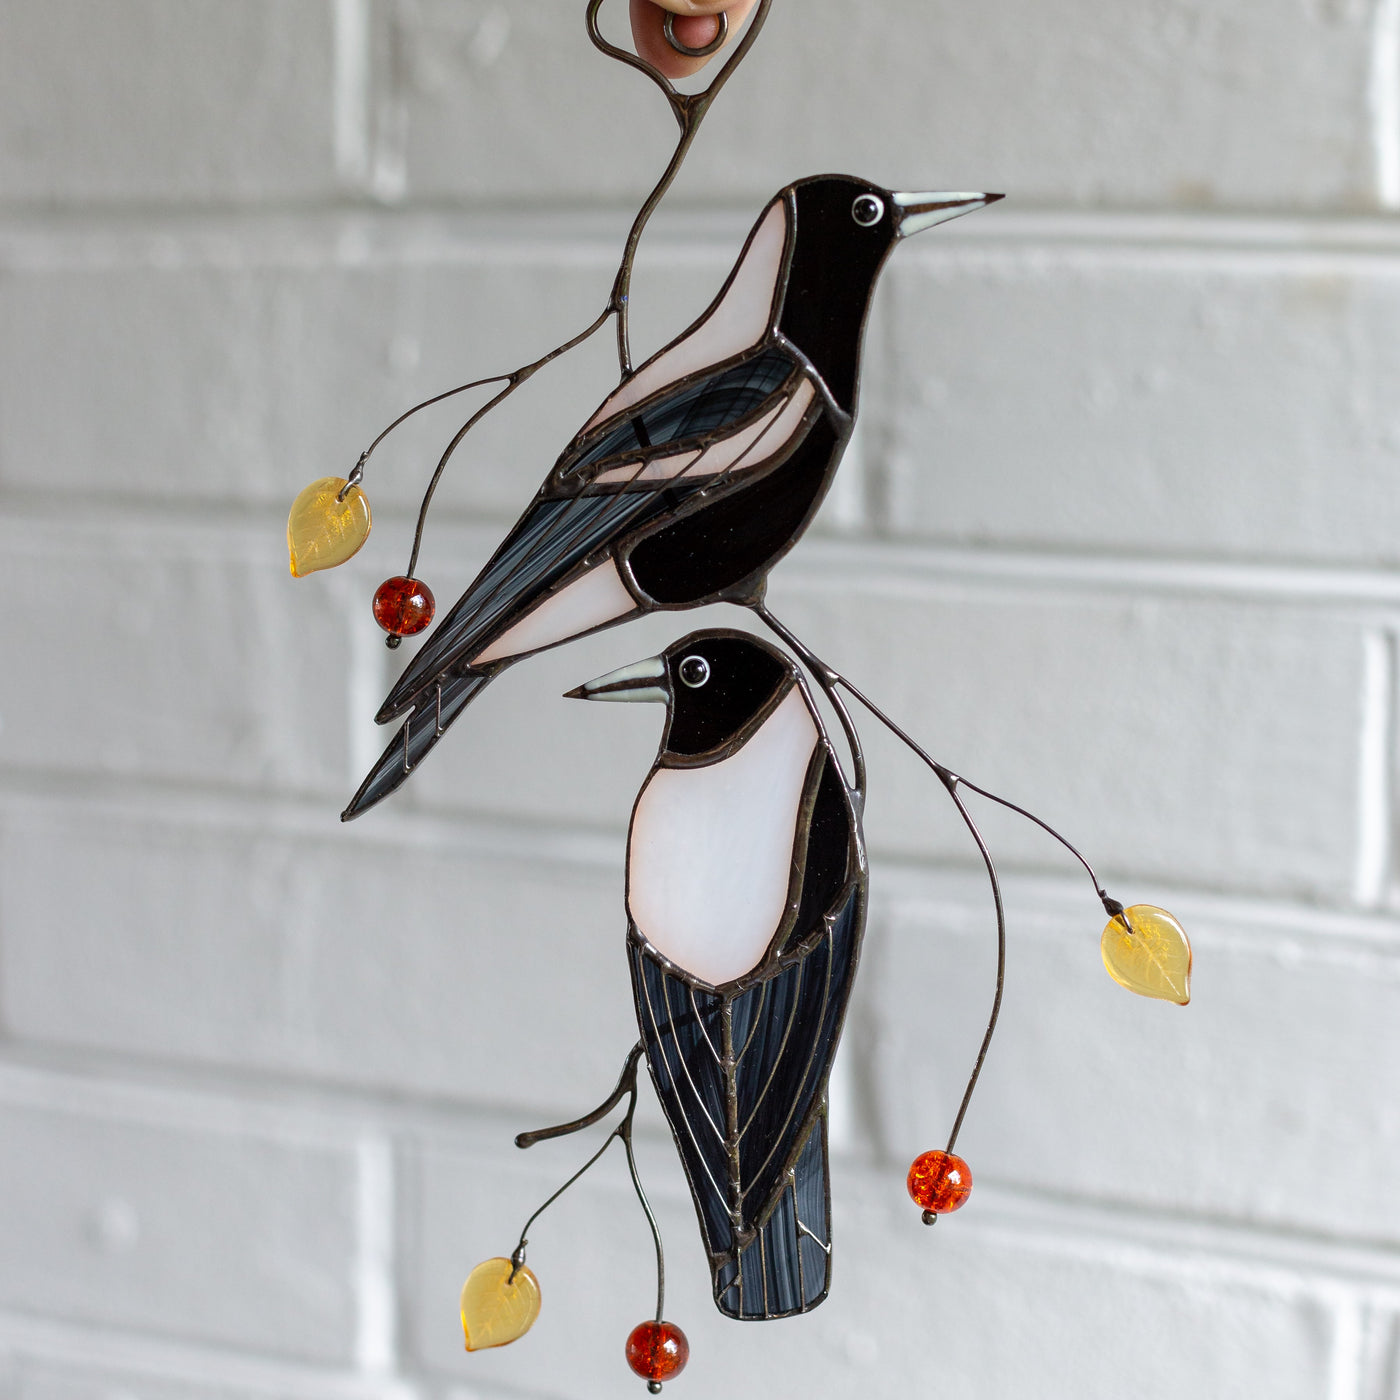 2 Australian magpies window hangings of stained glass 